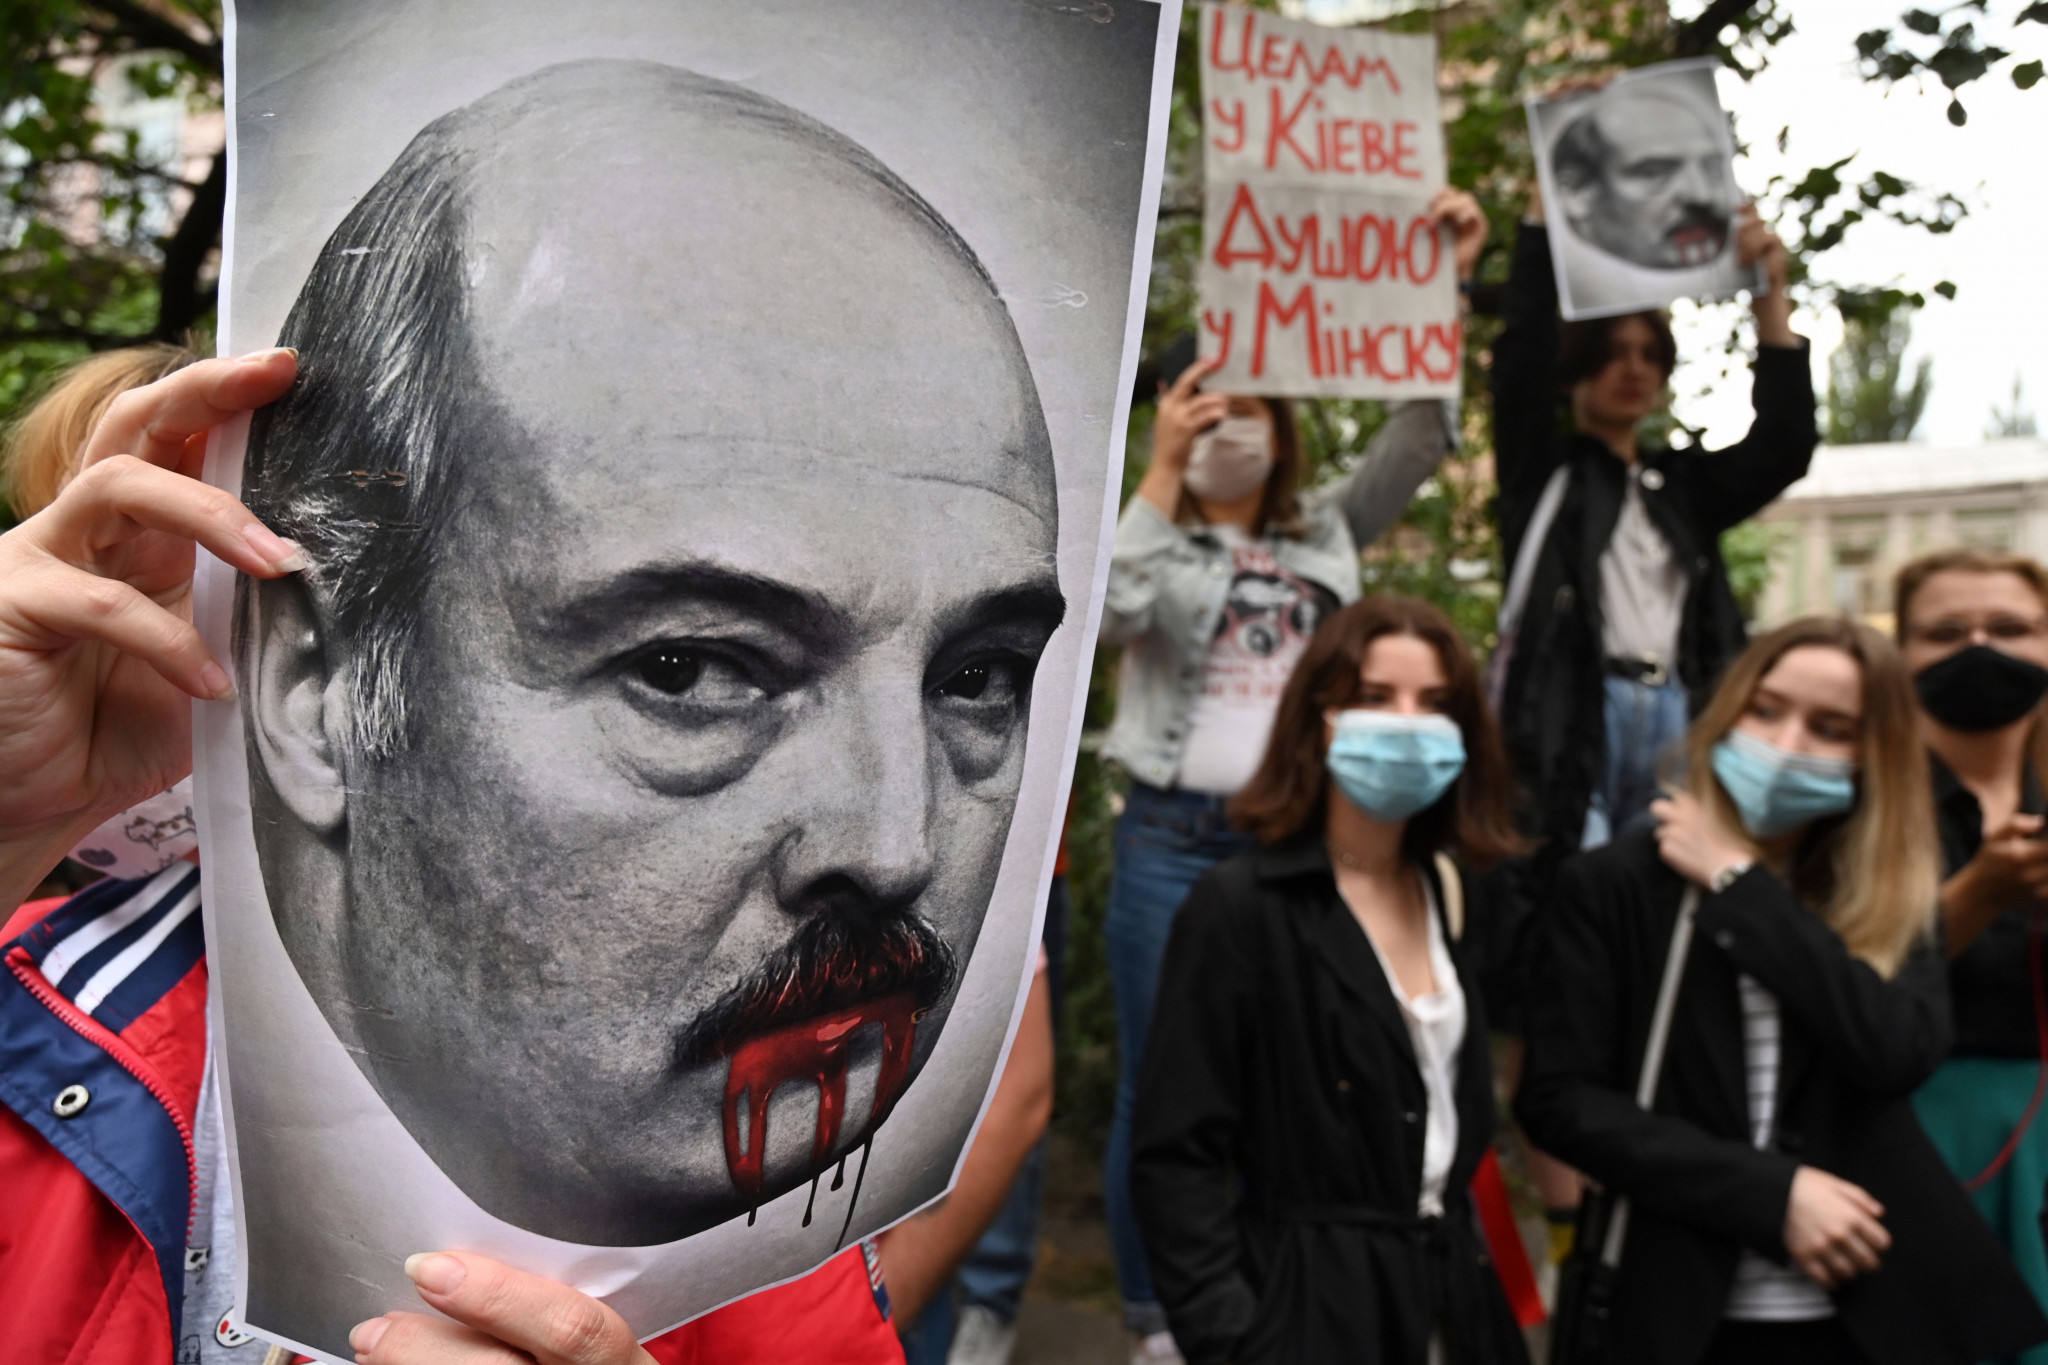 Protests have taken place in Belarus against President Alexander Lukashenko ©Getty Images